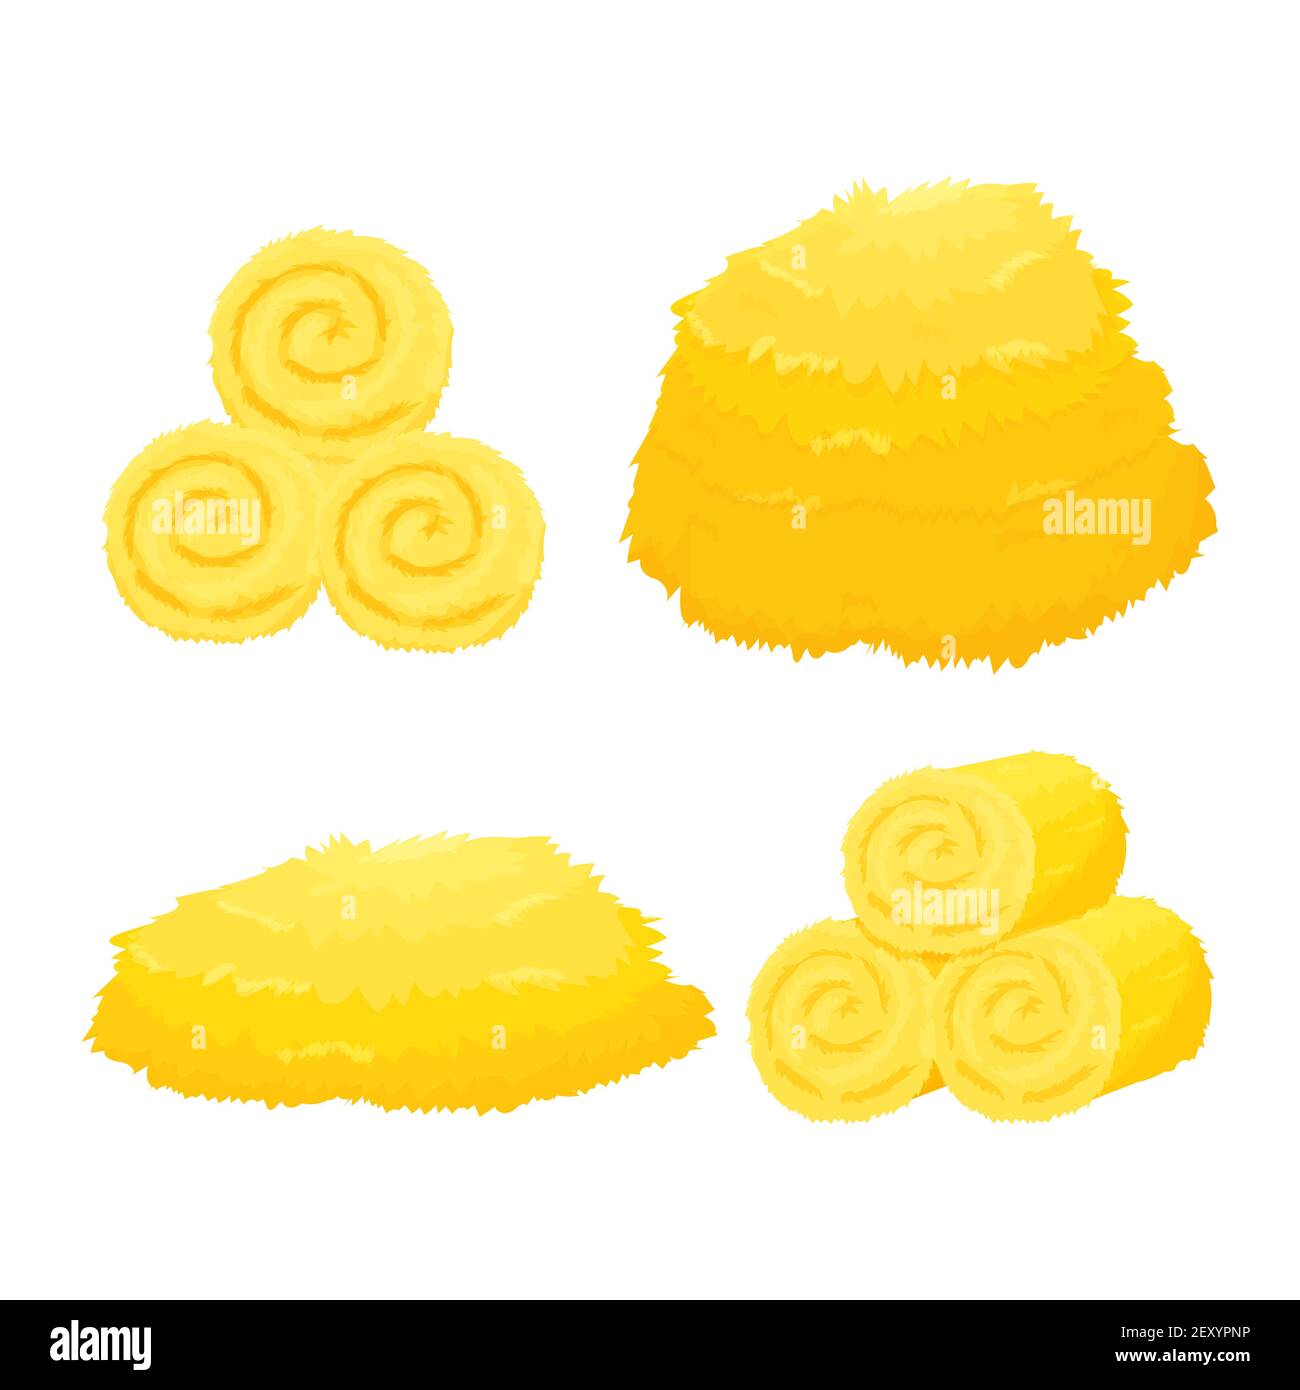 Set of Dry bale of hay, haycock in cartoon style isolated on white background. Roll pile, straw stack. Agriculture harvest, farm work stock vector illustration. Vector illustration Stock Vector